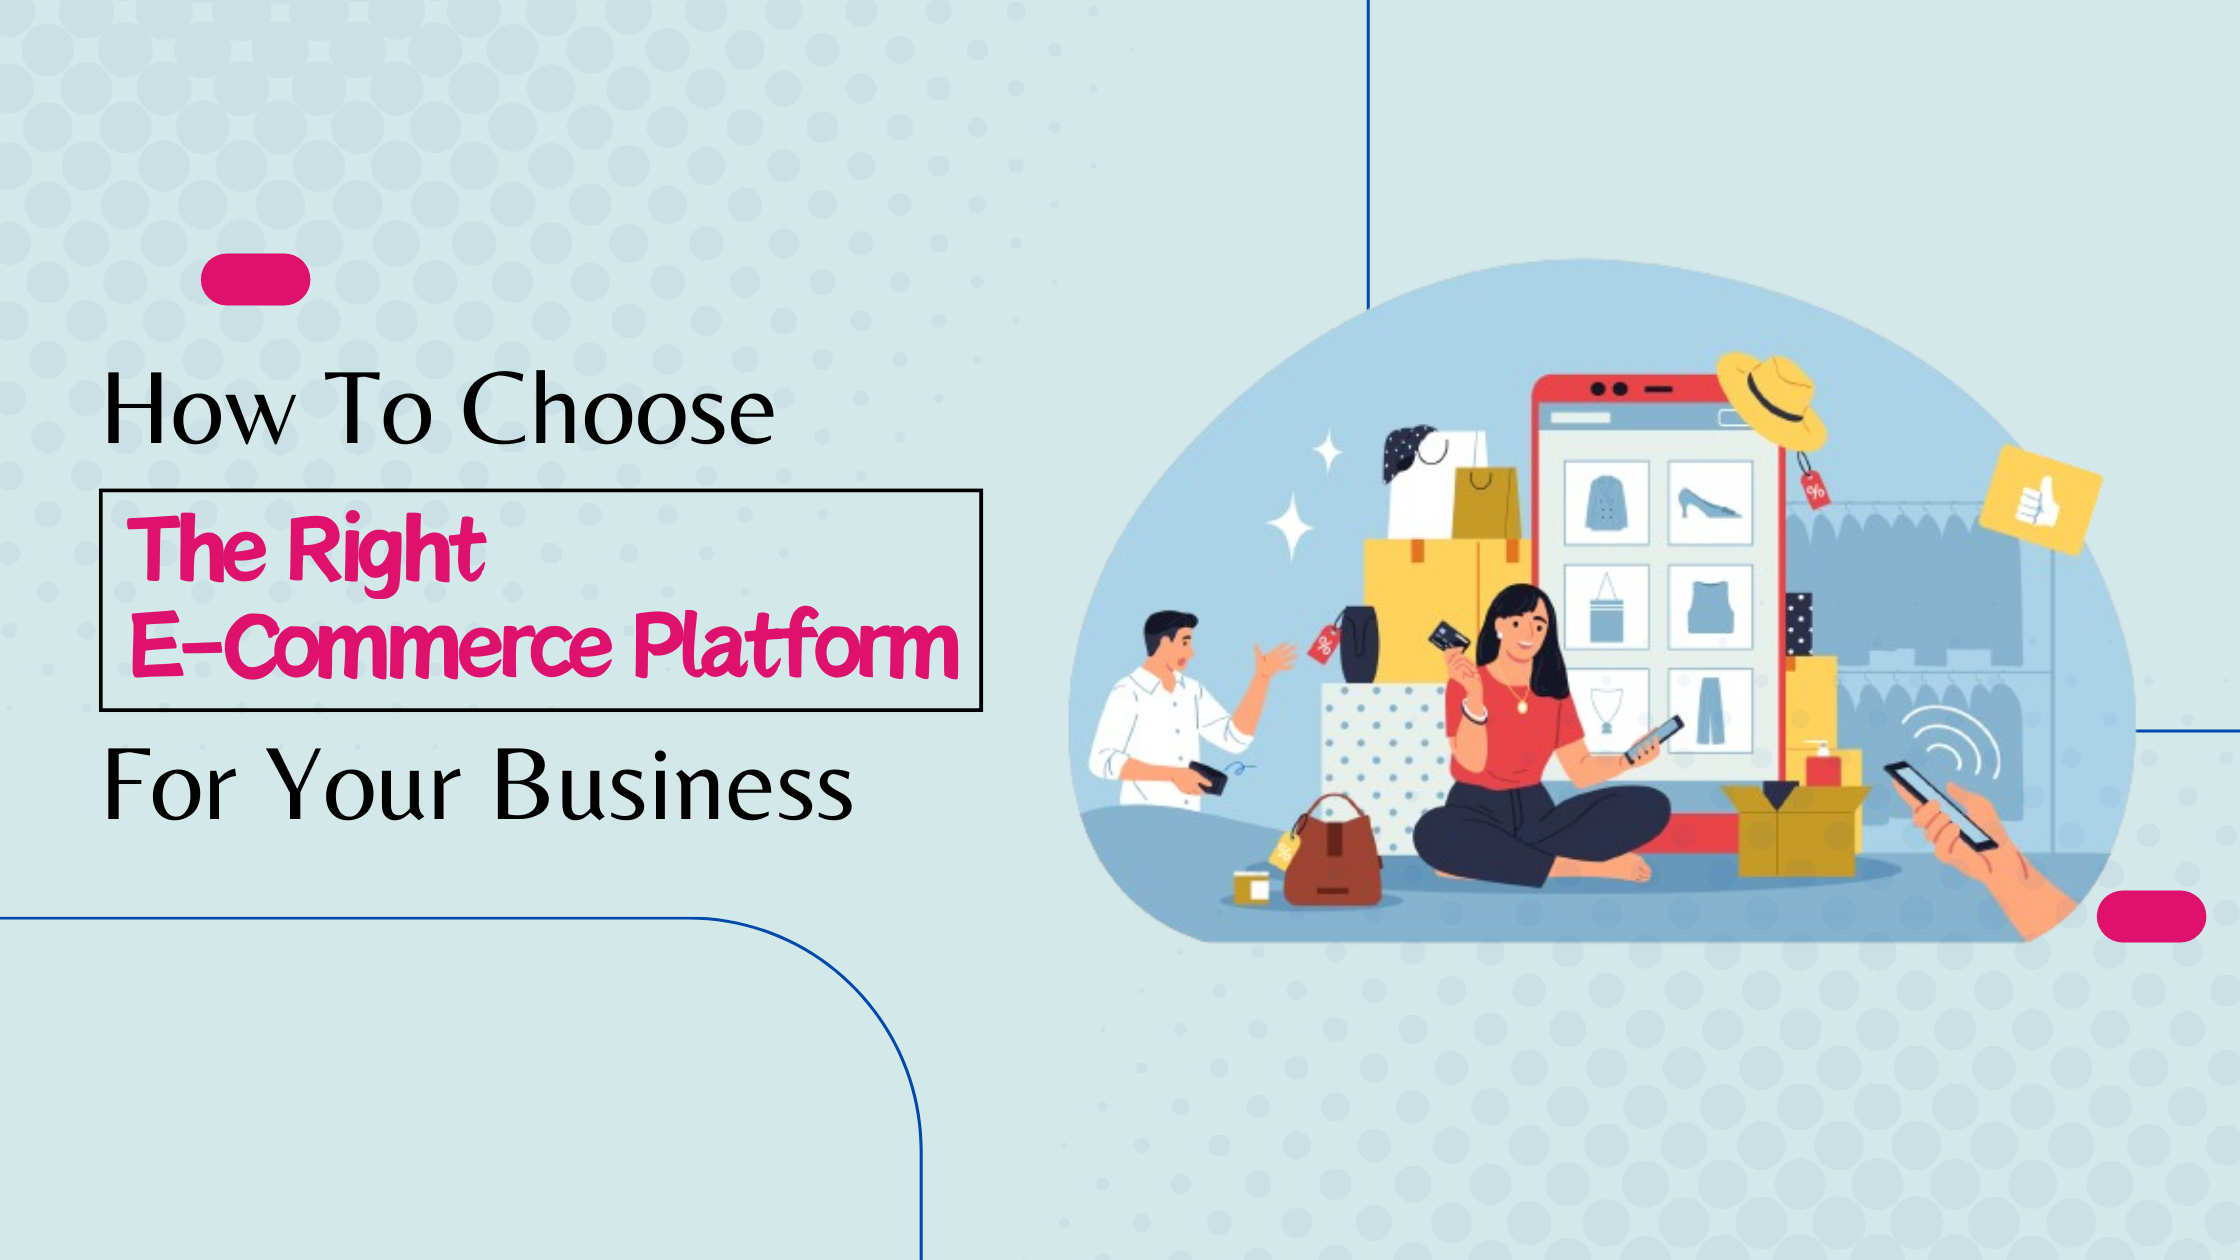 How to Choose the Right E-commerce Platform